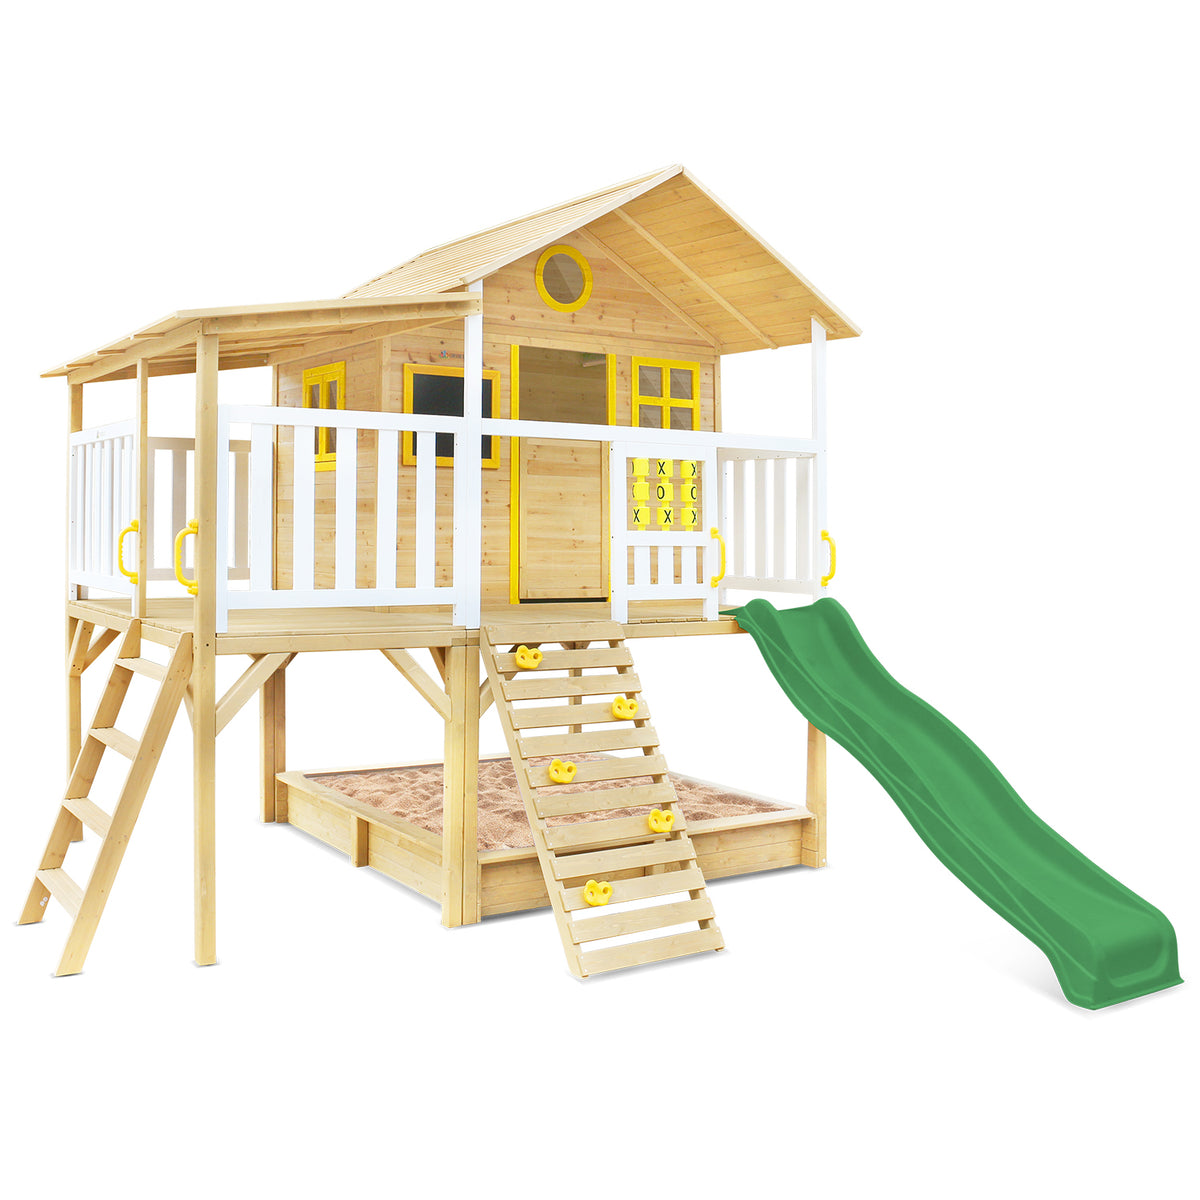 Lifespan Kids Warrigal Cubby House with Pergola (Green Slide)